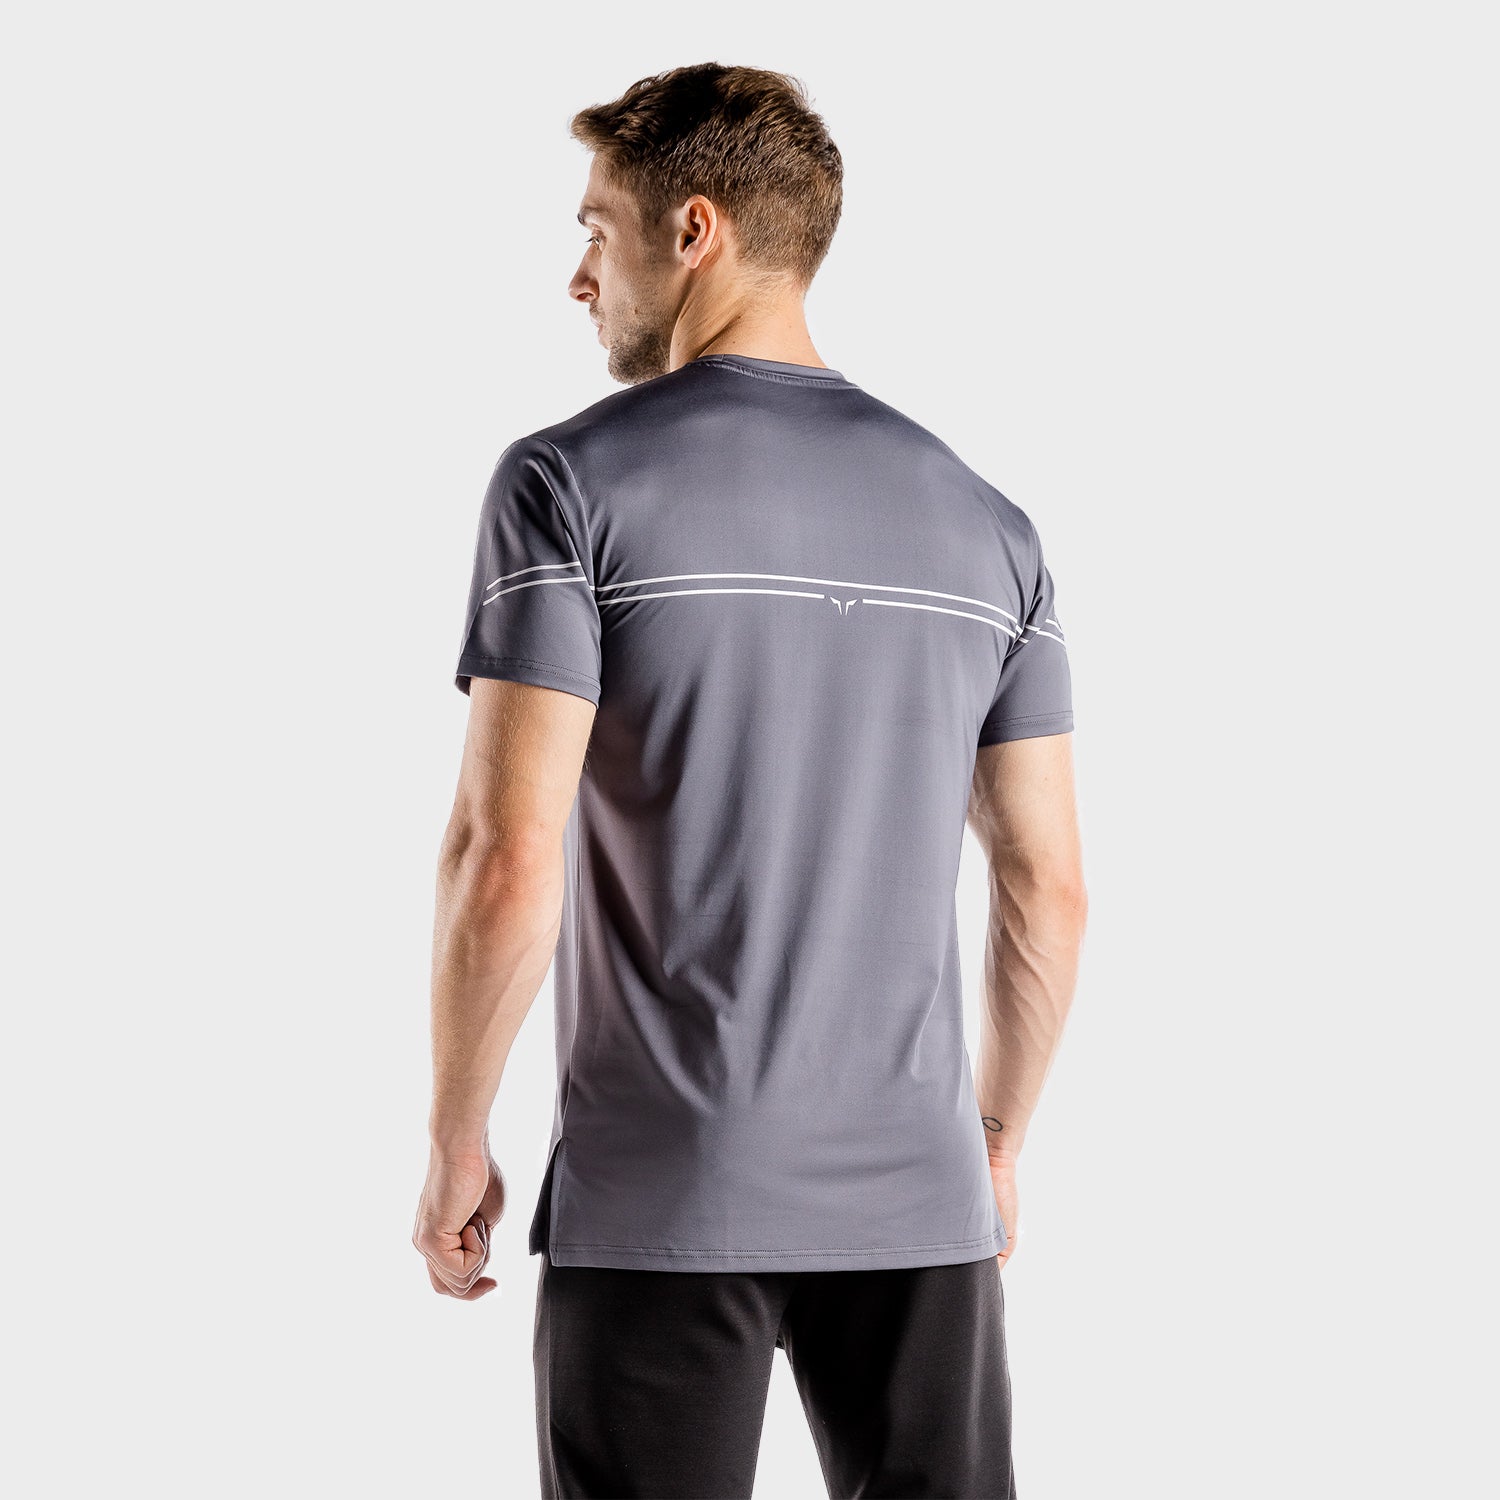 squatwolf-gym-wear-flux-tee-grey-workout-shirts-for-men